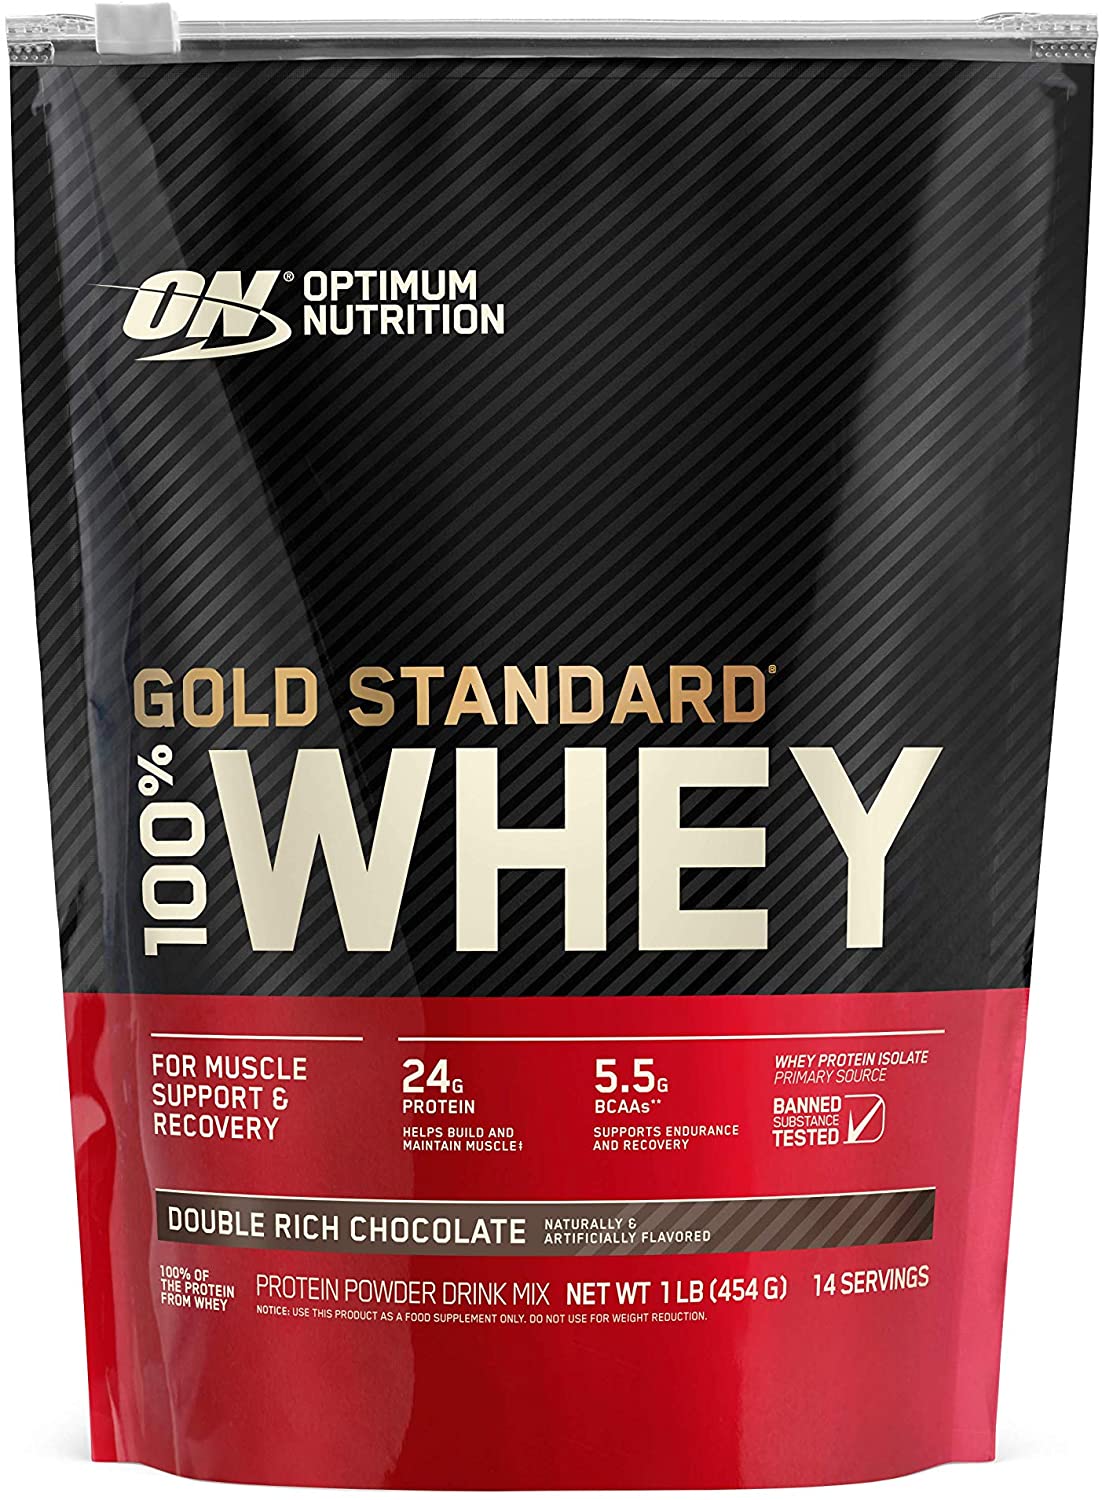 Optimum Nutrition Gold Standard 100% Whey Protein, Double Rich Chocolate, 1lb, 454g, SNS Health, Sports Nutrition